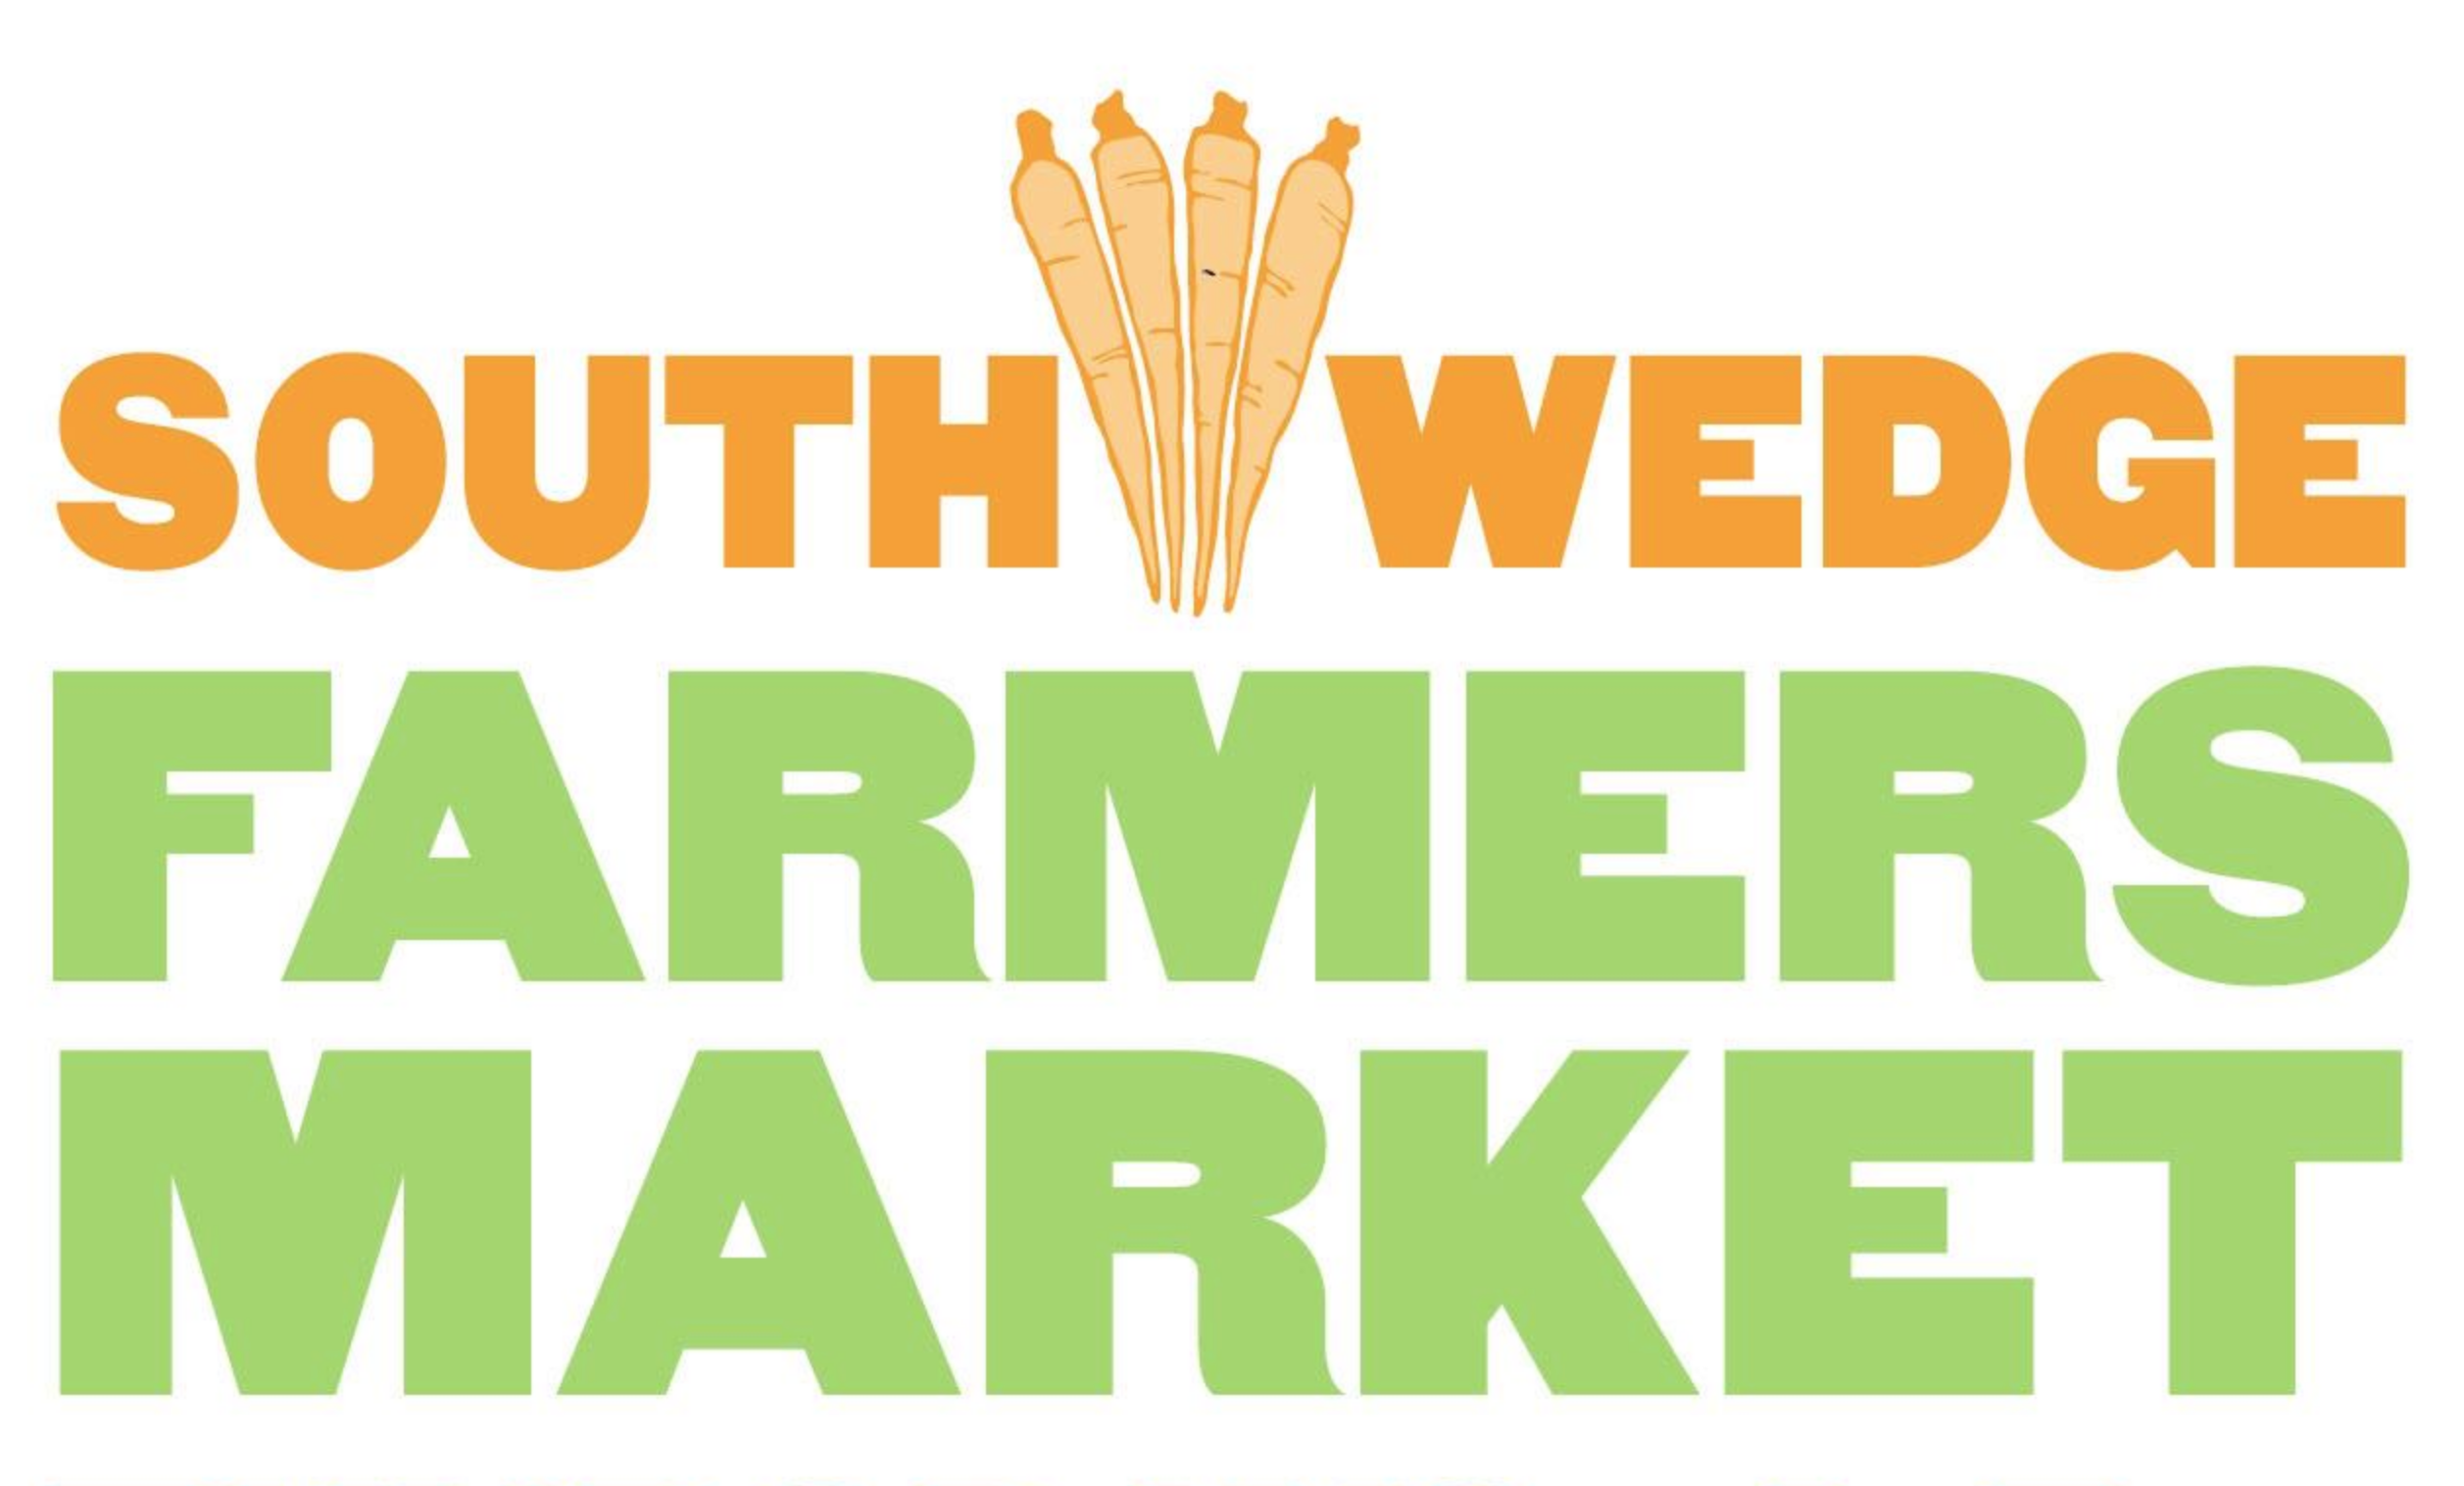 South Wedge Mother’s Day Market